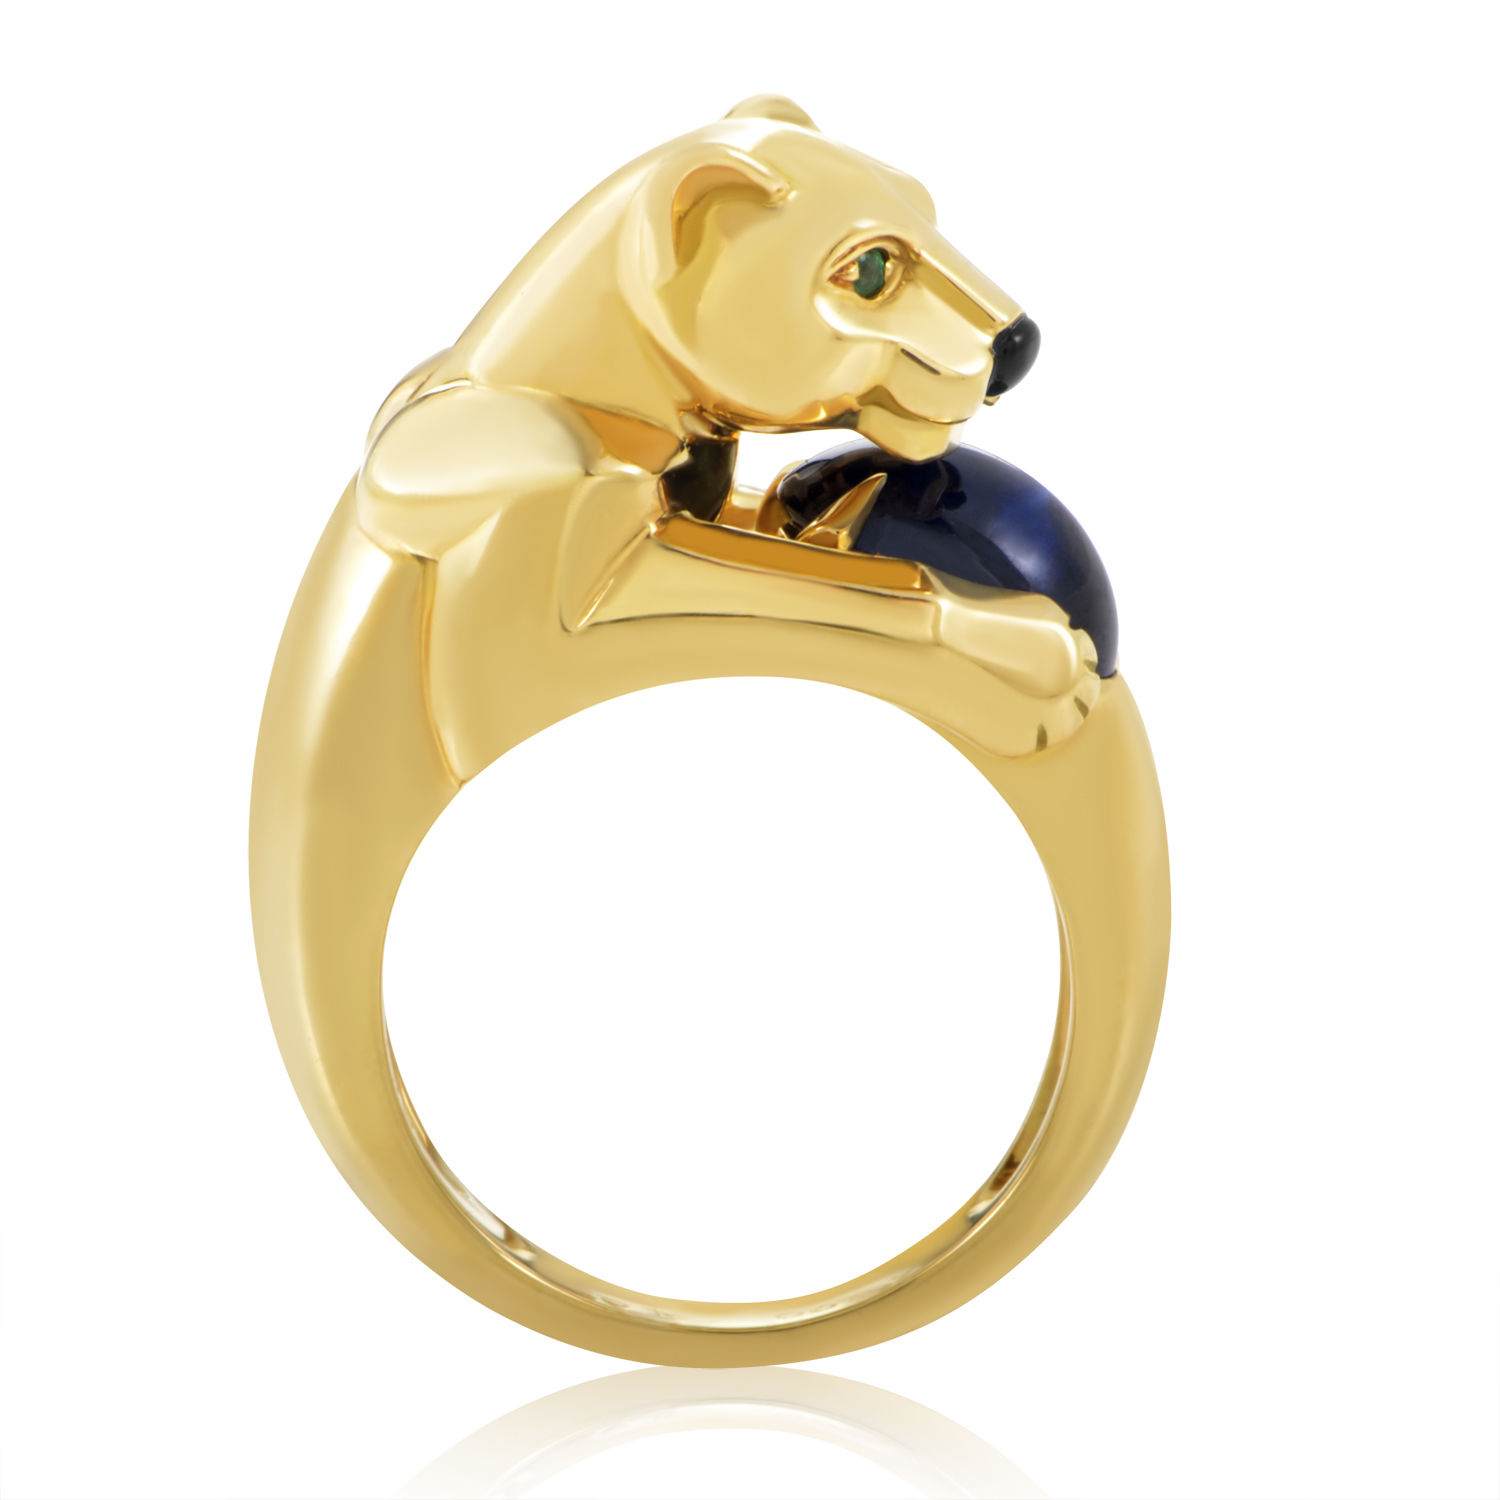 Cartier Panthere 18K Yellow Gold Sapphire Ring